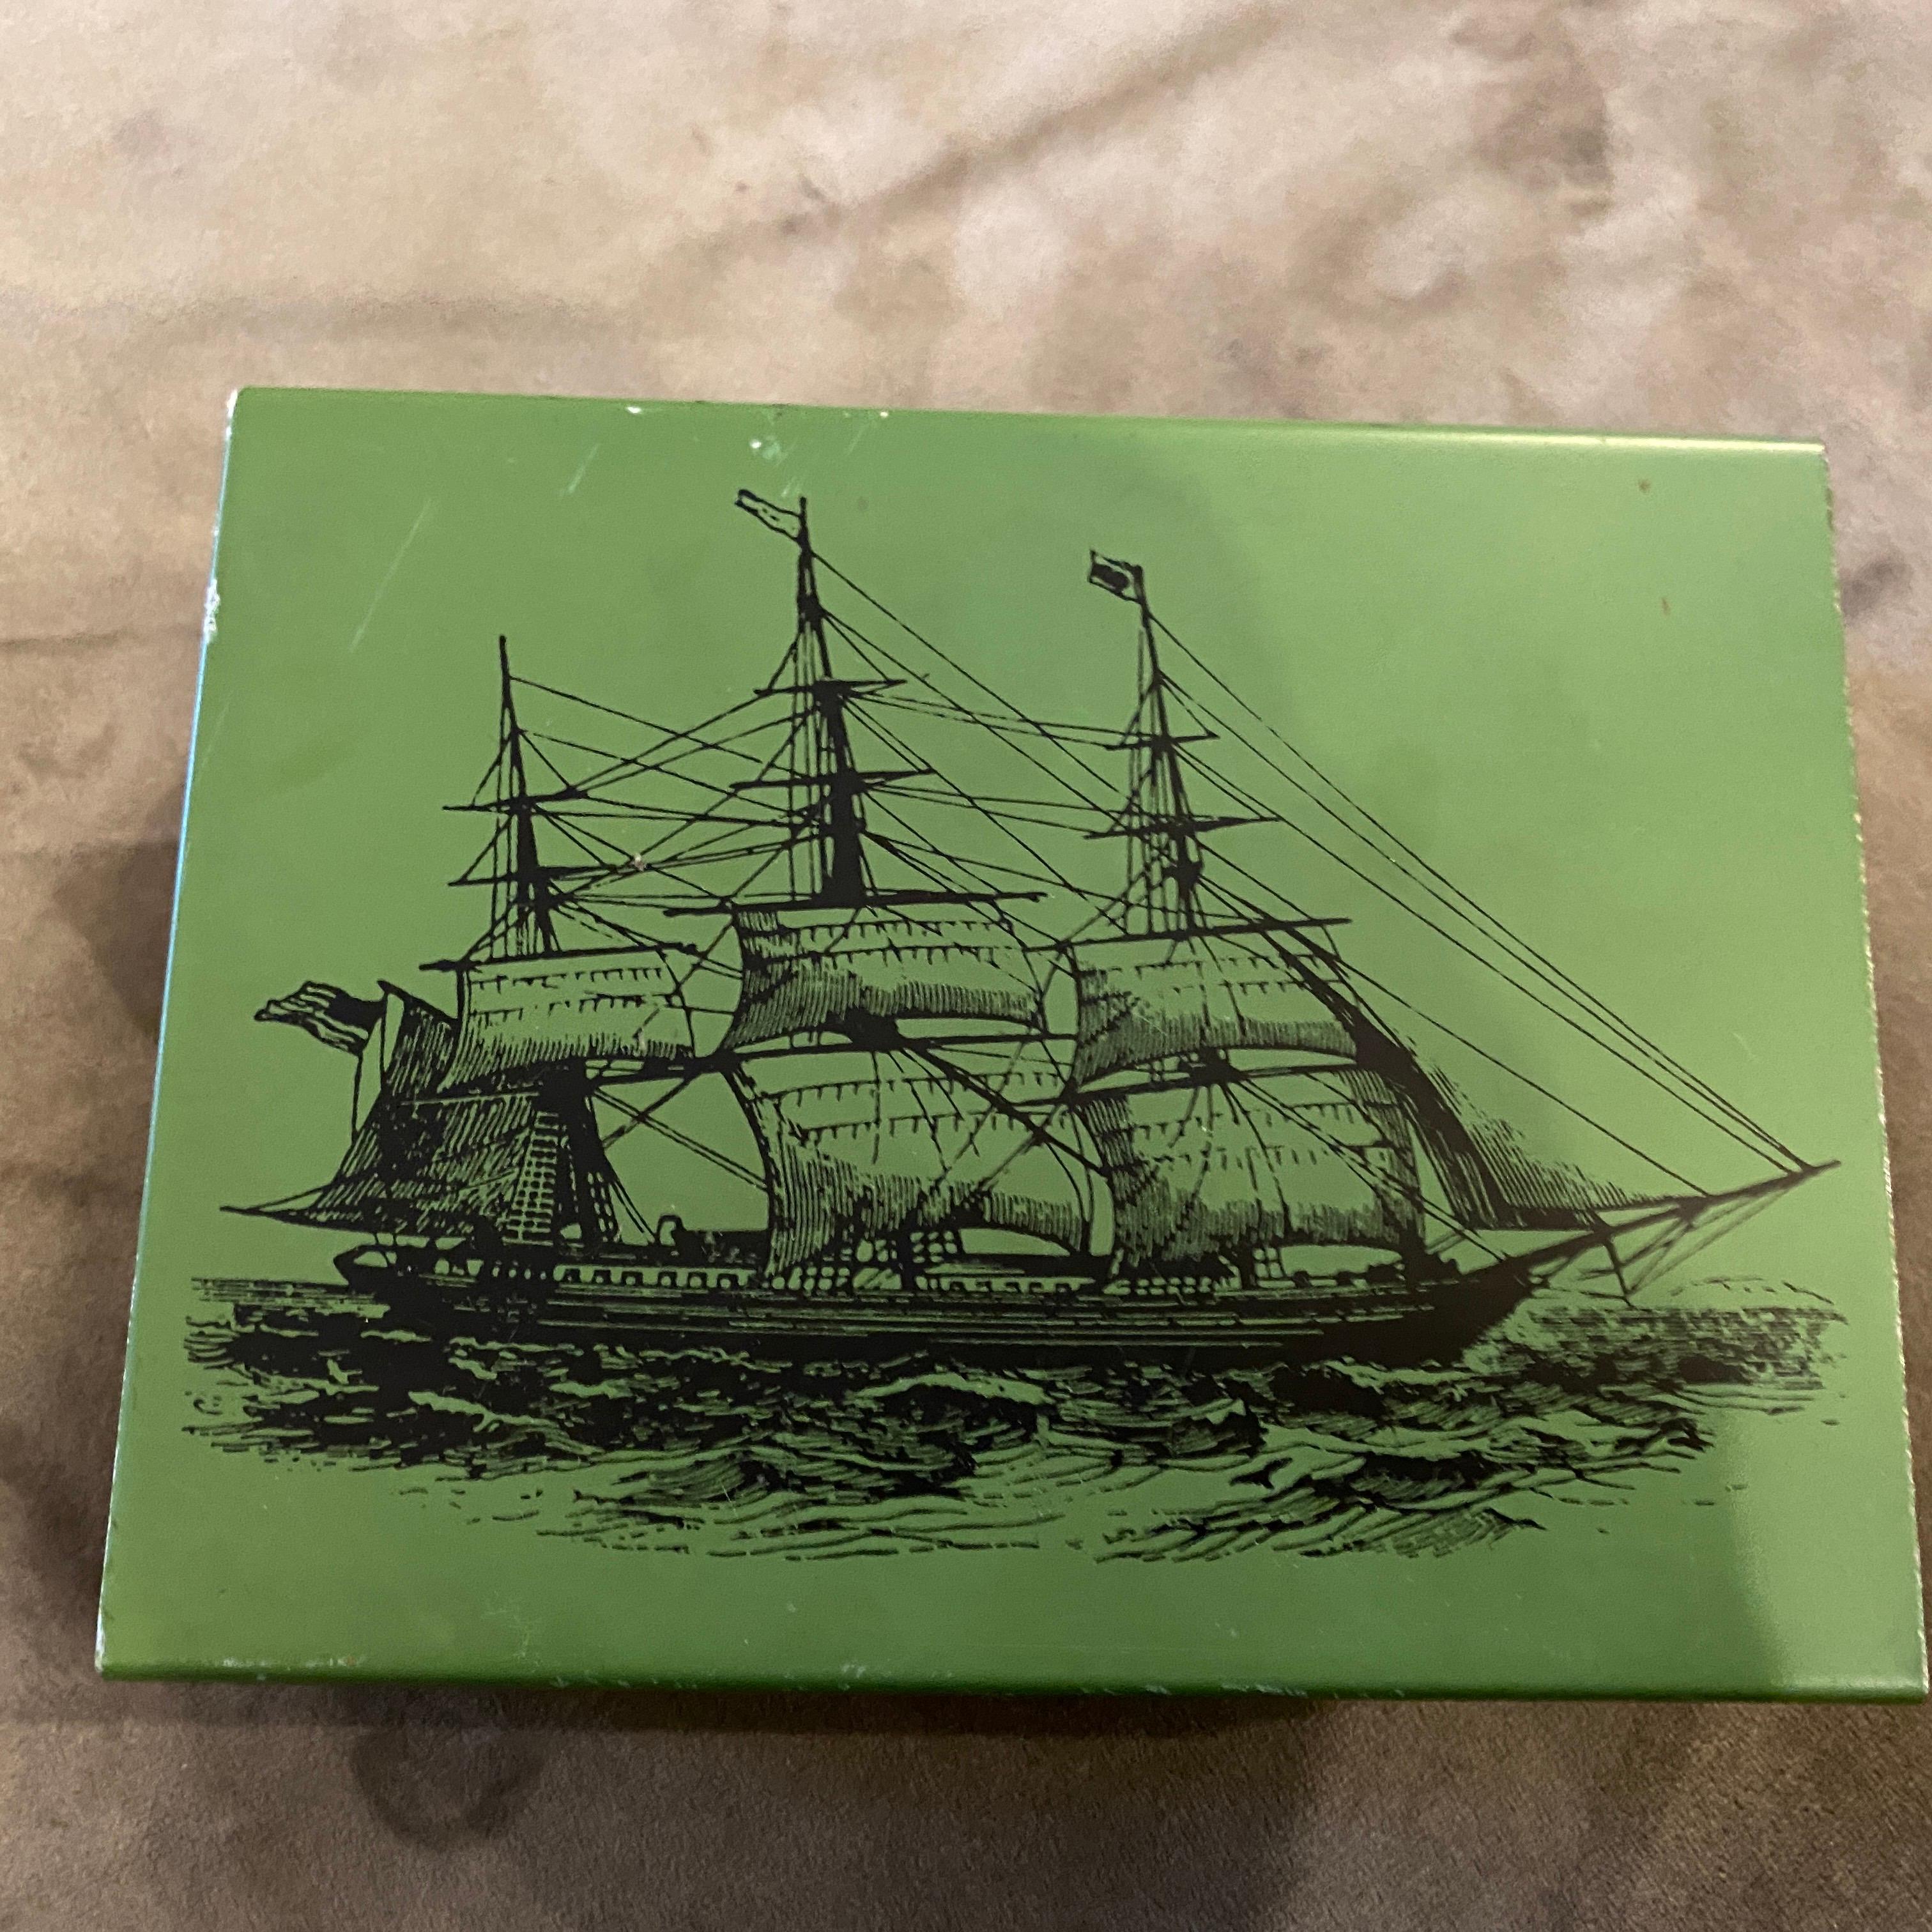 A decorative box designed by Piero Fornasetti and manufactured by Atelier Fornasetti, It has a green metal cover with a black sailing ship, typical of Piero Fornasetti and a mahogany inner compartment. The bottom part is grey felt. 